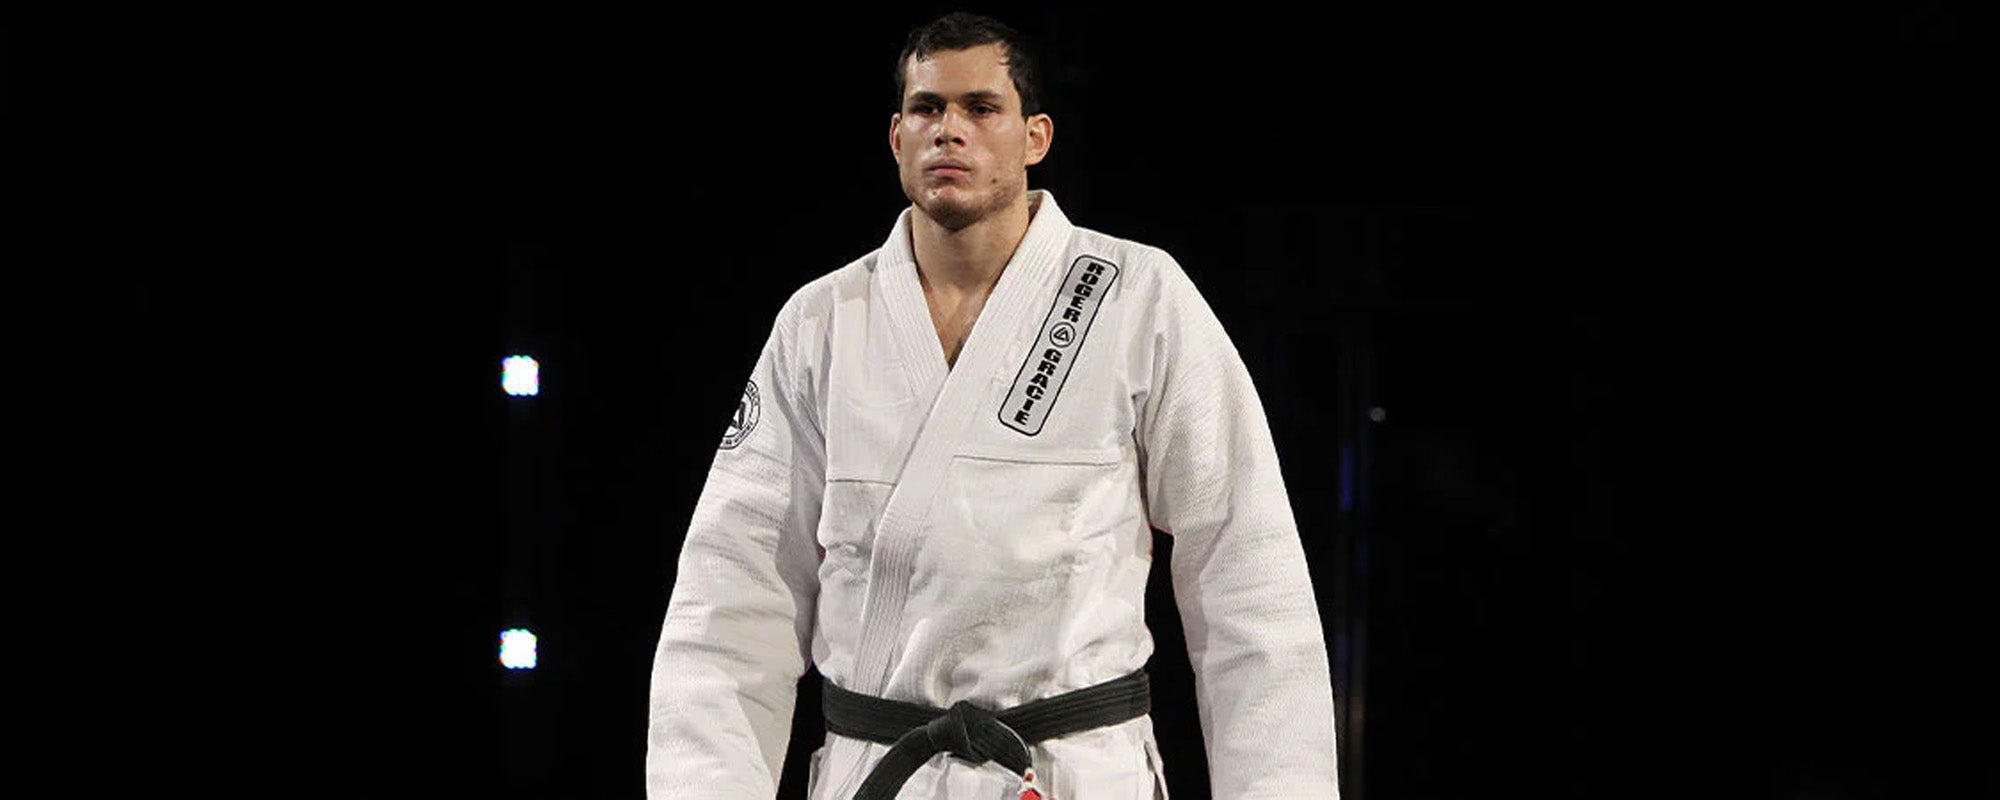 A List of Interesting Roger Gracie Facts